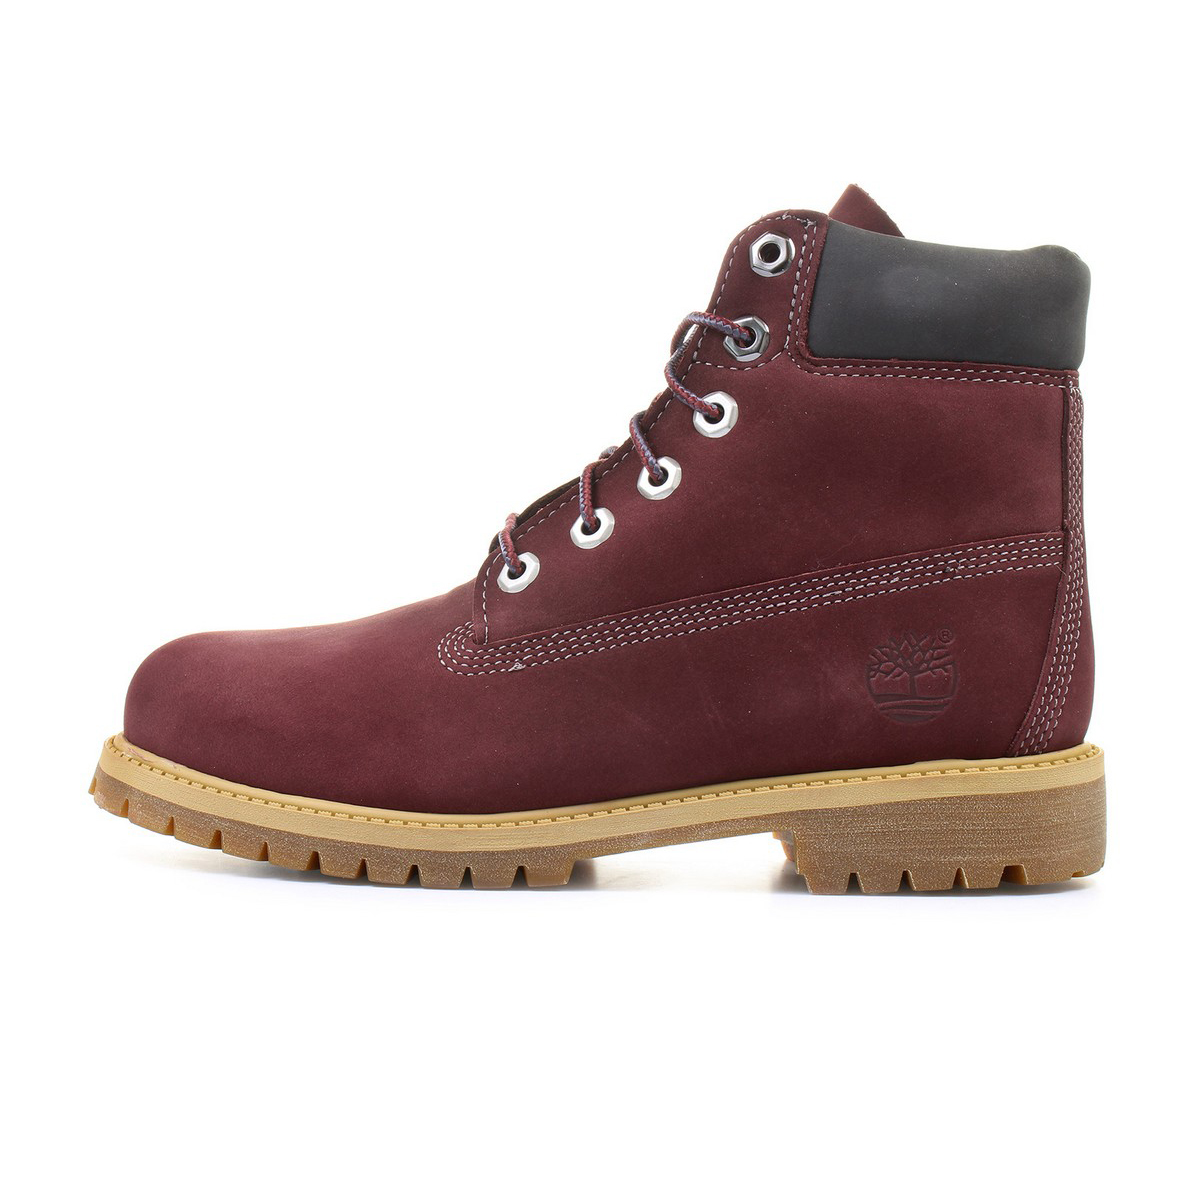 Timberland 6 IN CLASSIC BOOT 